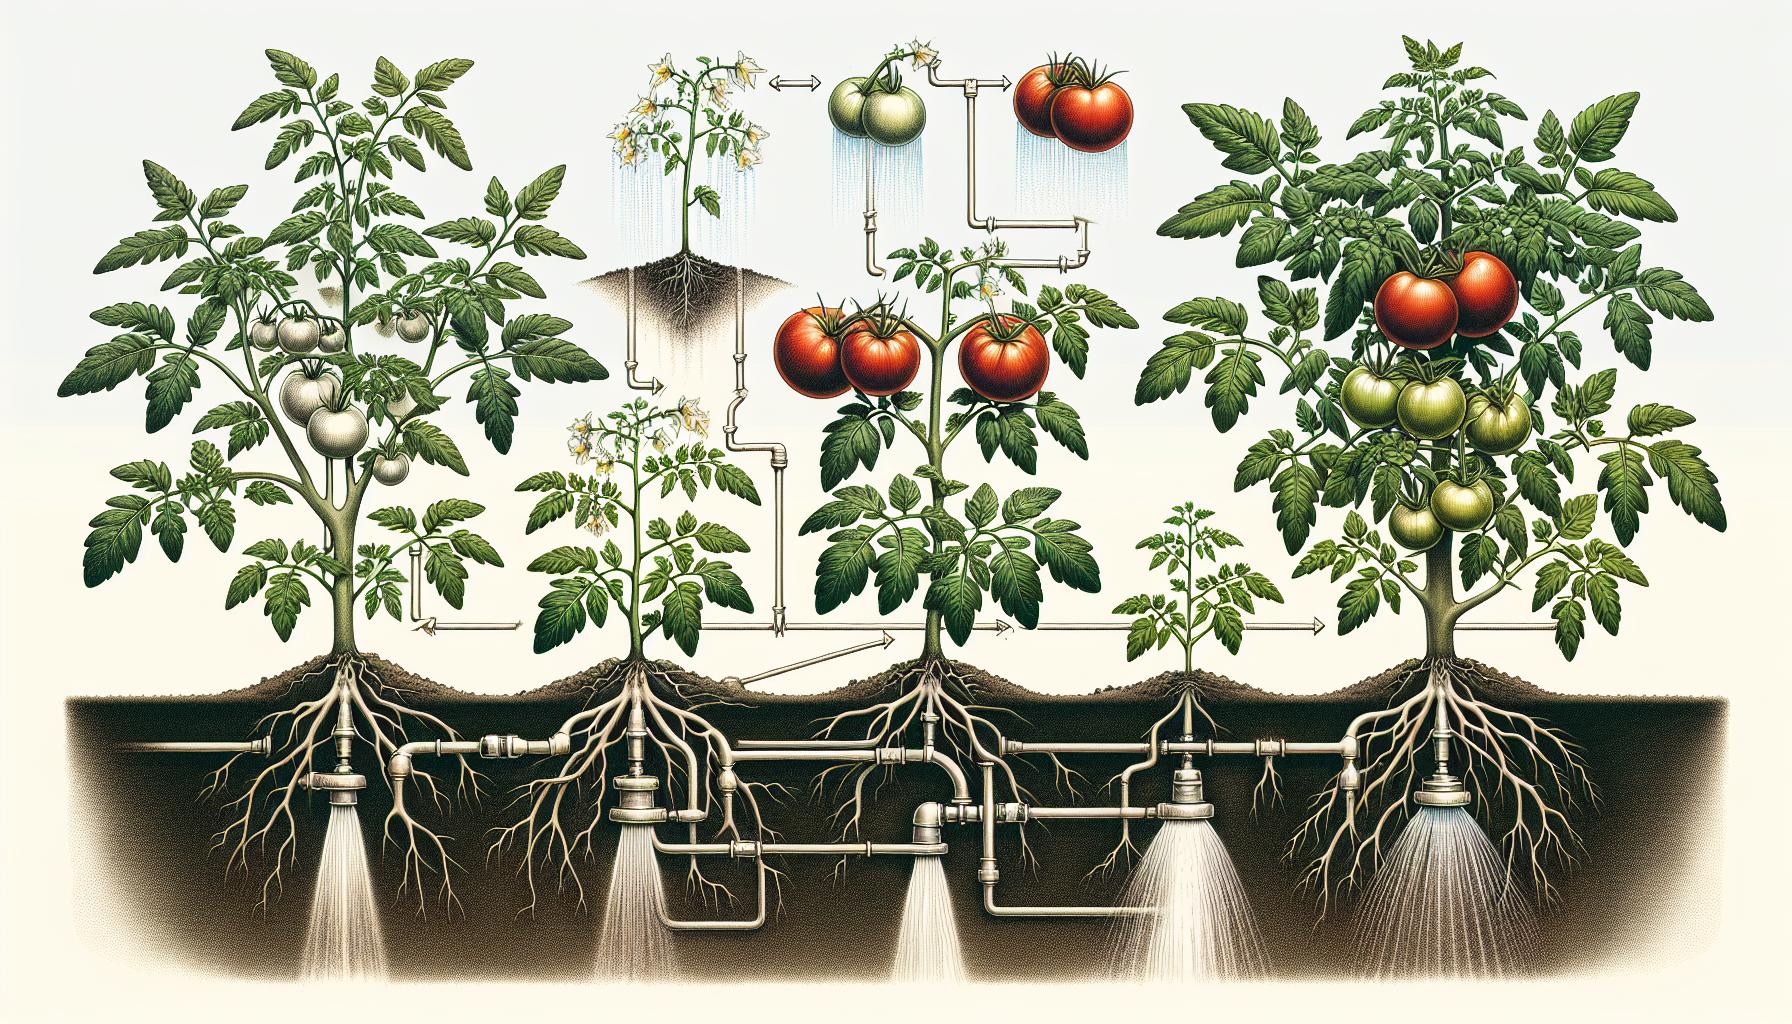 hydroponic tomato plants growth stages